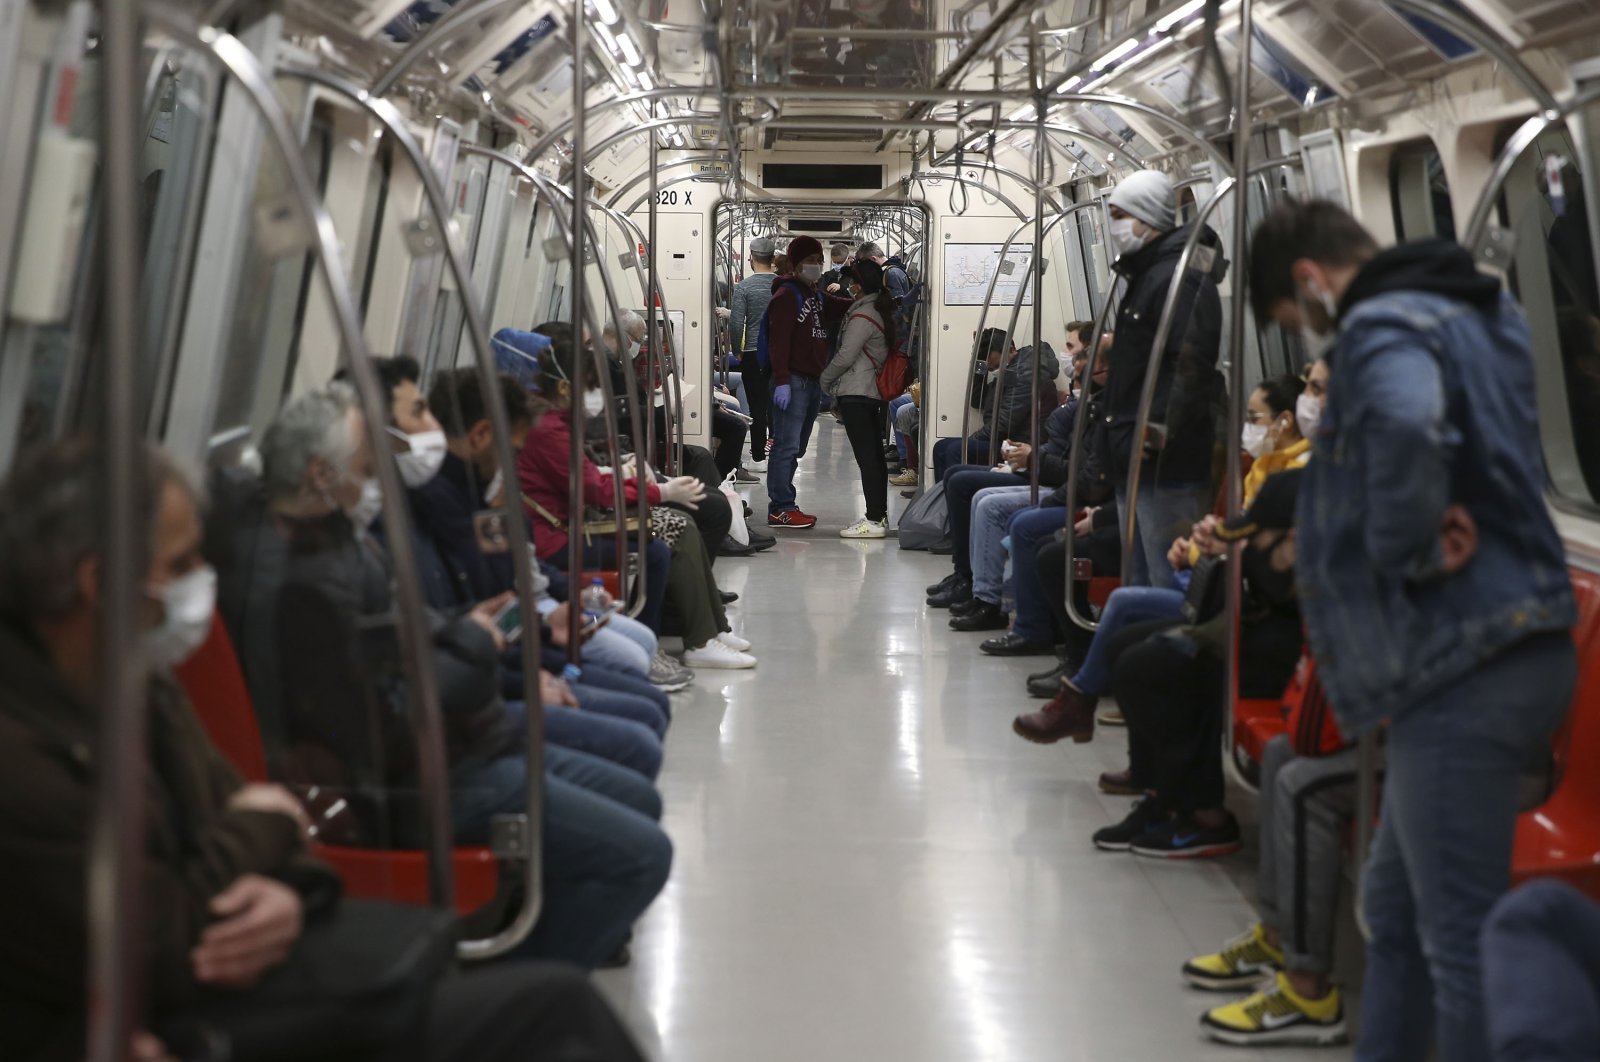 Commuters, most wearing protective masks due to the coronavirus outbreak, travel on the metro in Istanbul, Turkey, April 10, 2020. (AP Photo)